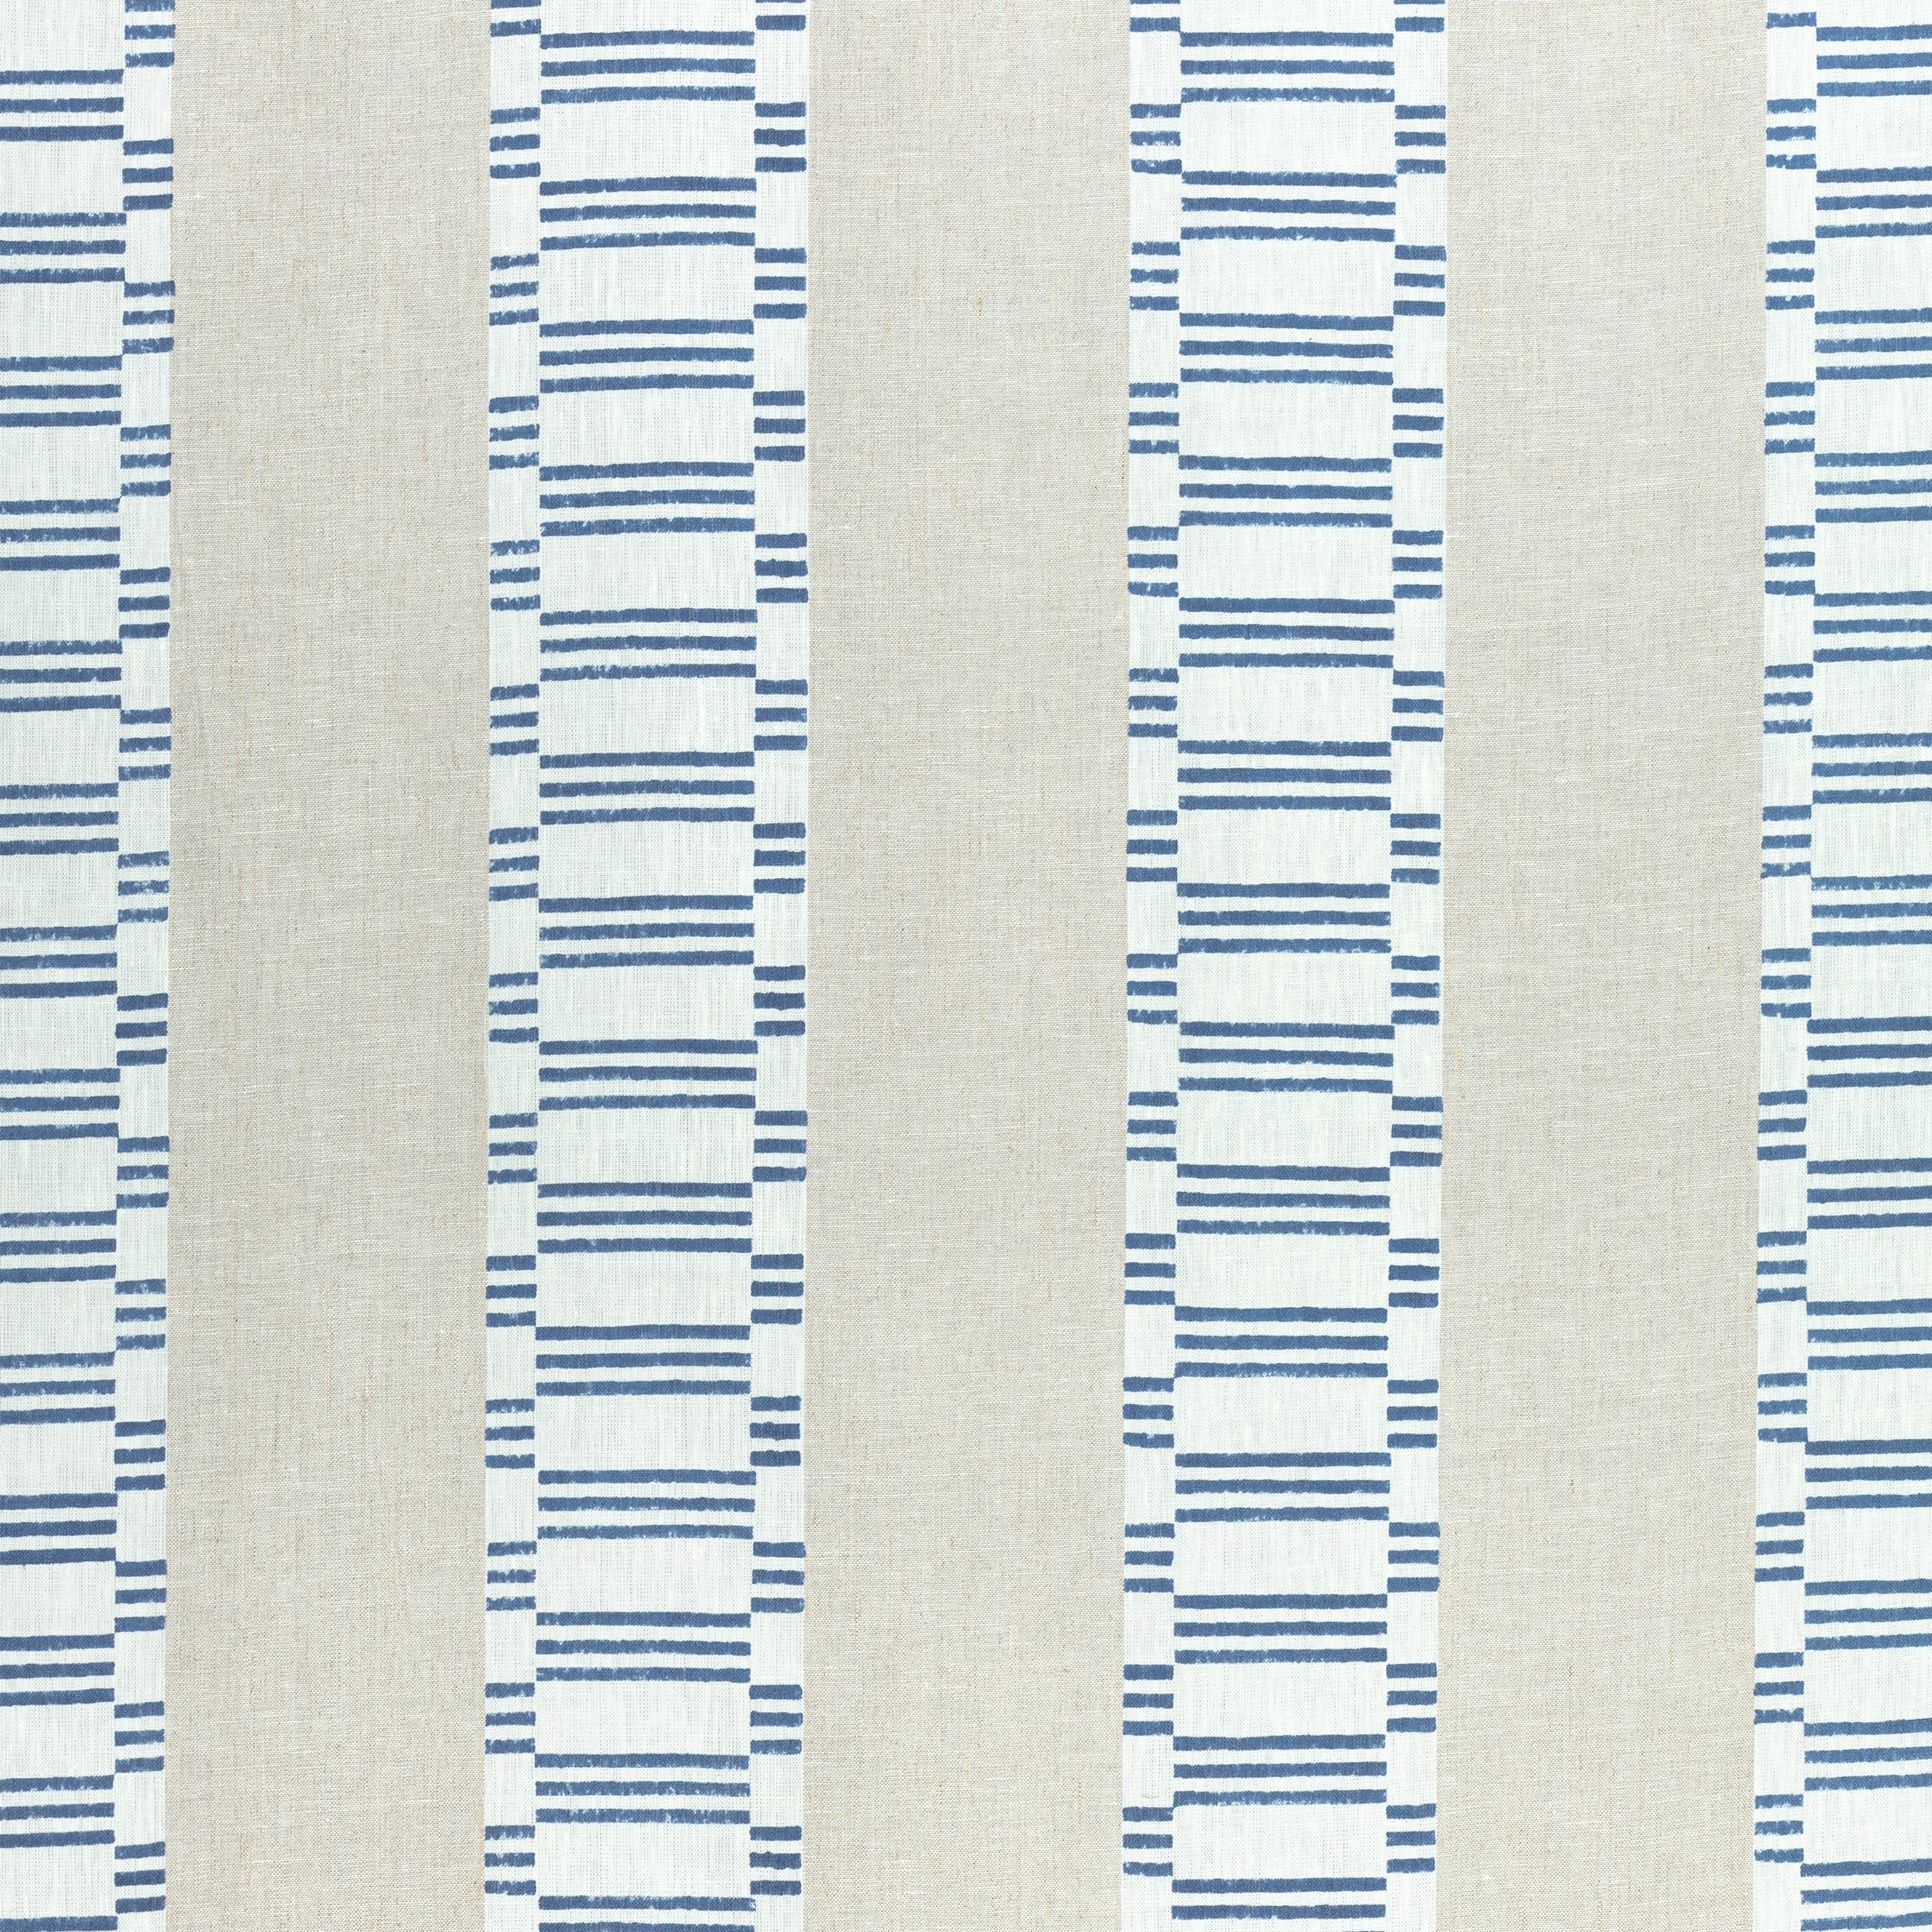 Japonic Stripe fabric in navy color - pattern number AF9823 - by Anna French in the Nara collection